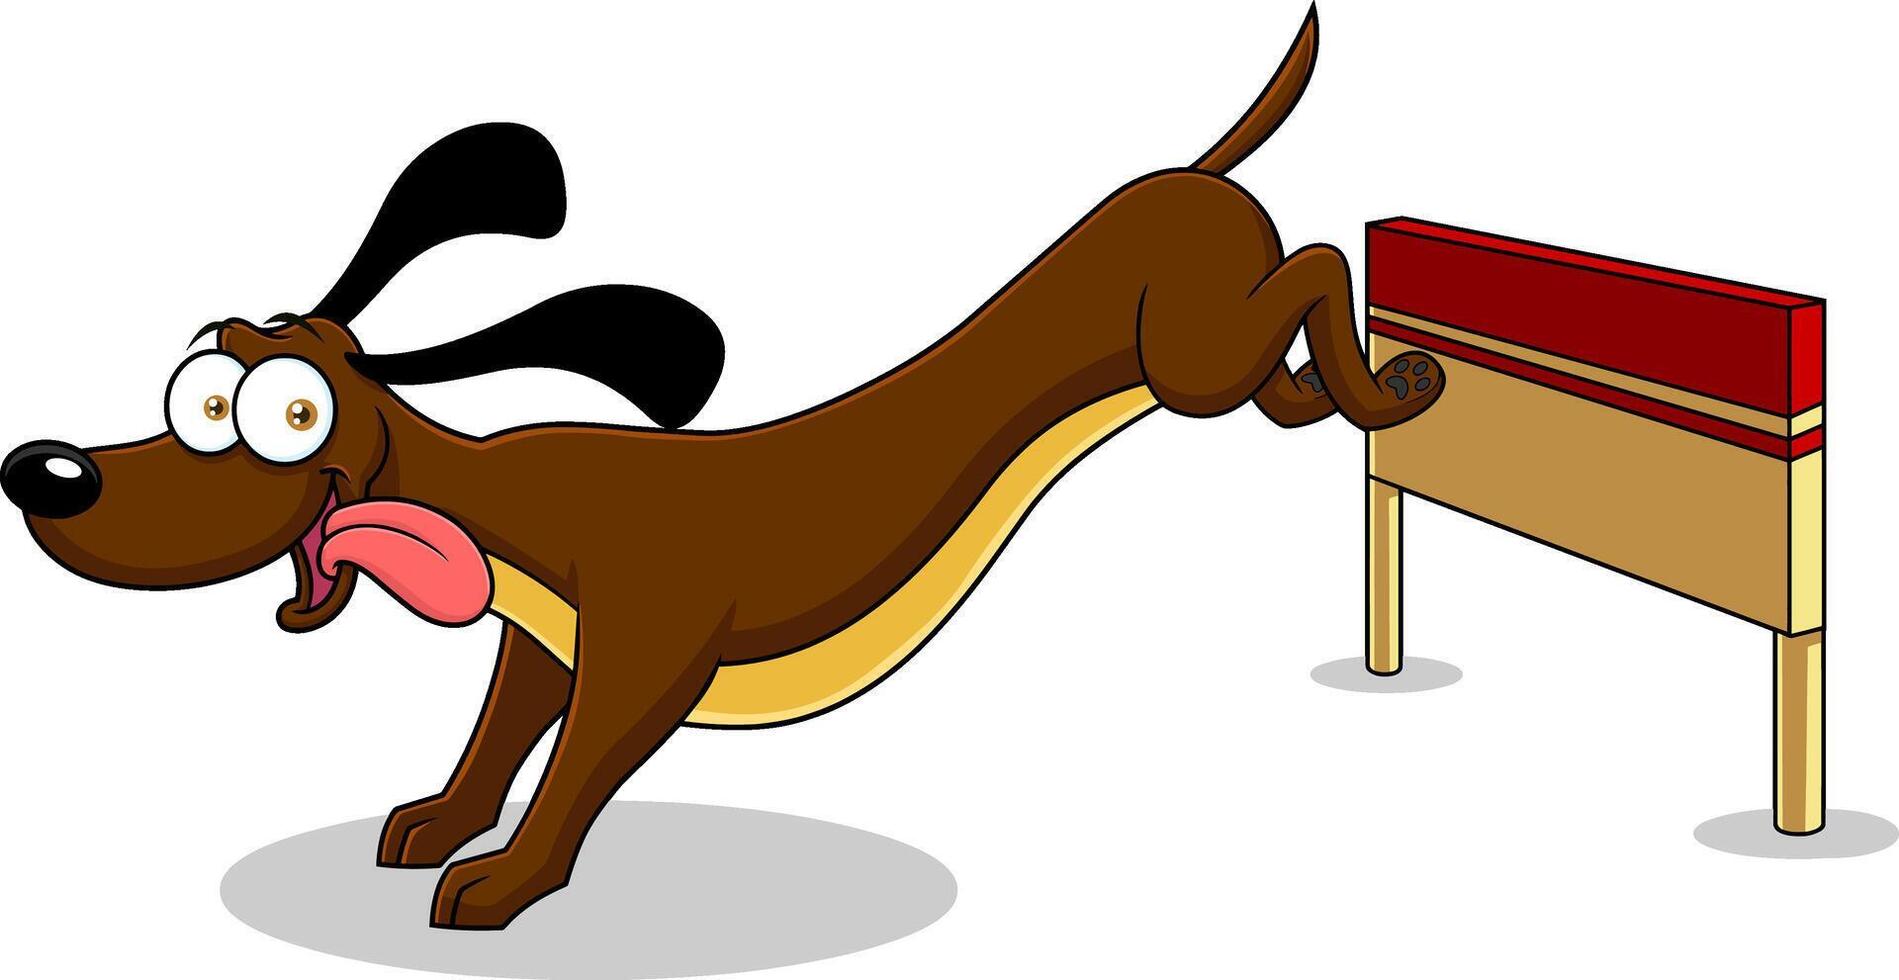 Dog Cartoon Character Jumps Over Obstacle Barrier vector